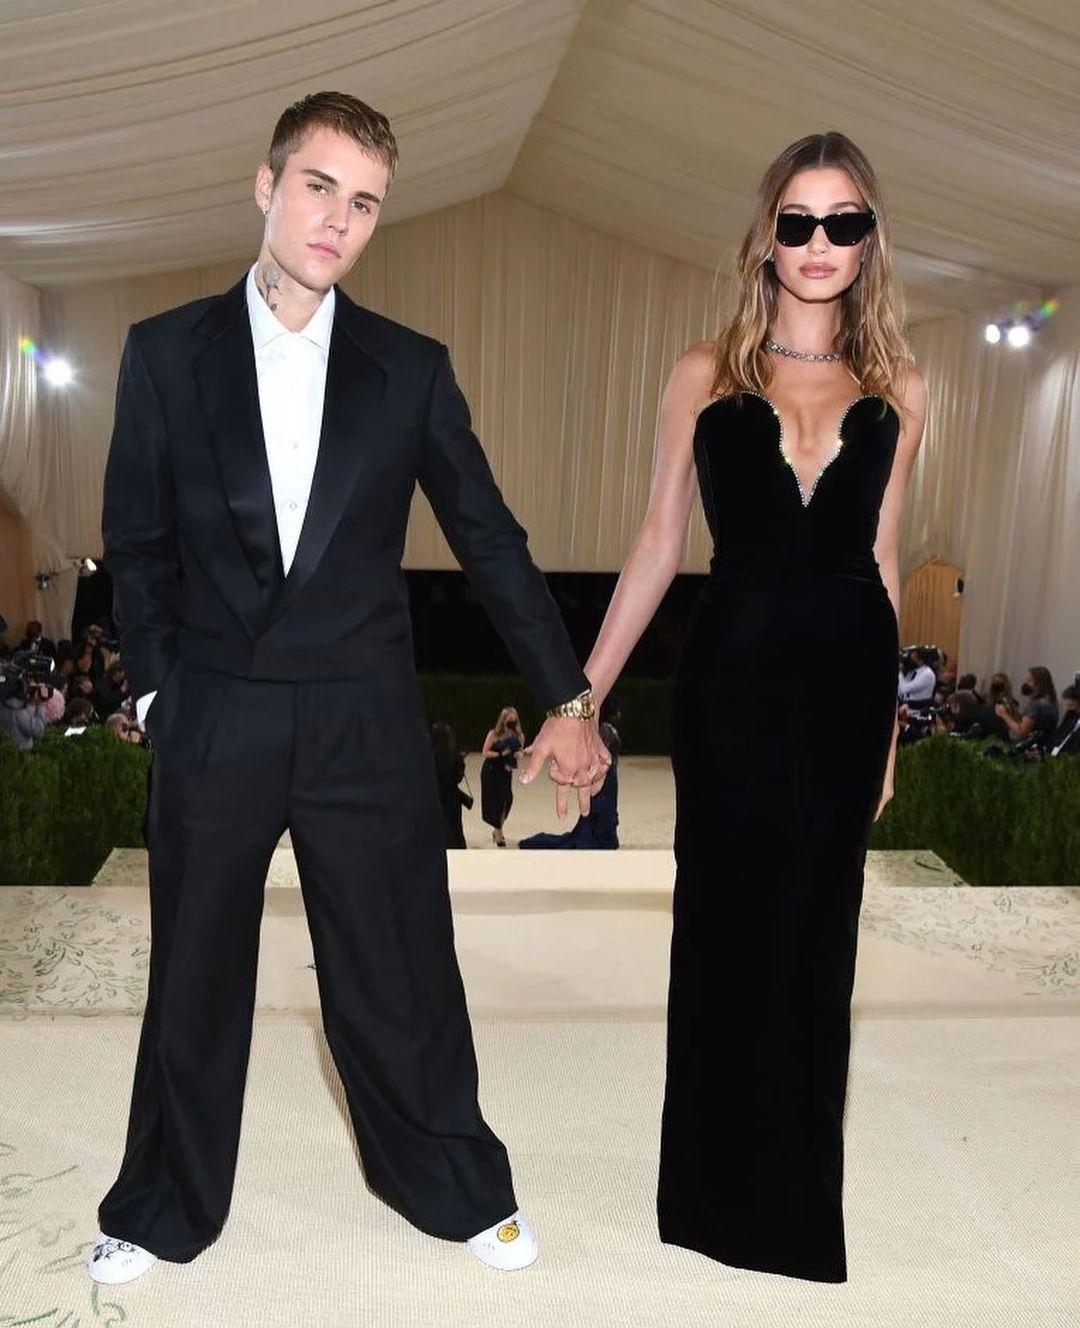 A lovely photo of Justin and Hailey Bieber holding hands, in their Met Gala outfits.